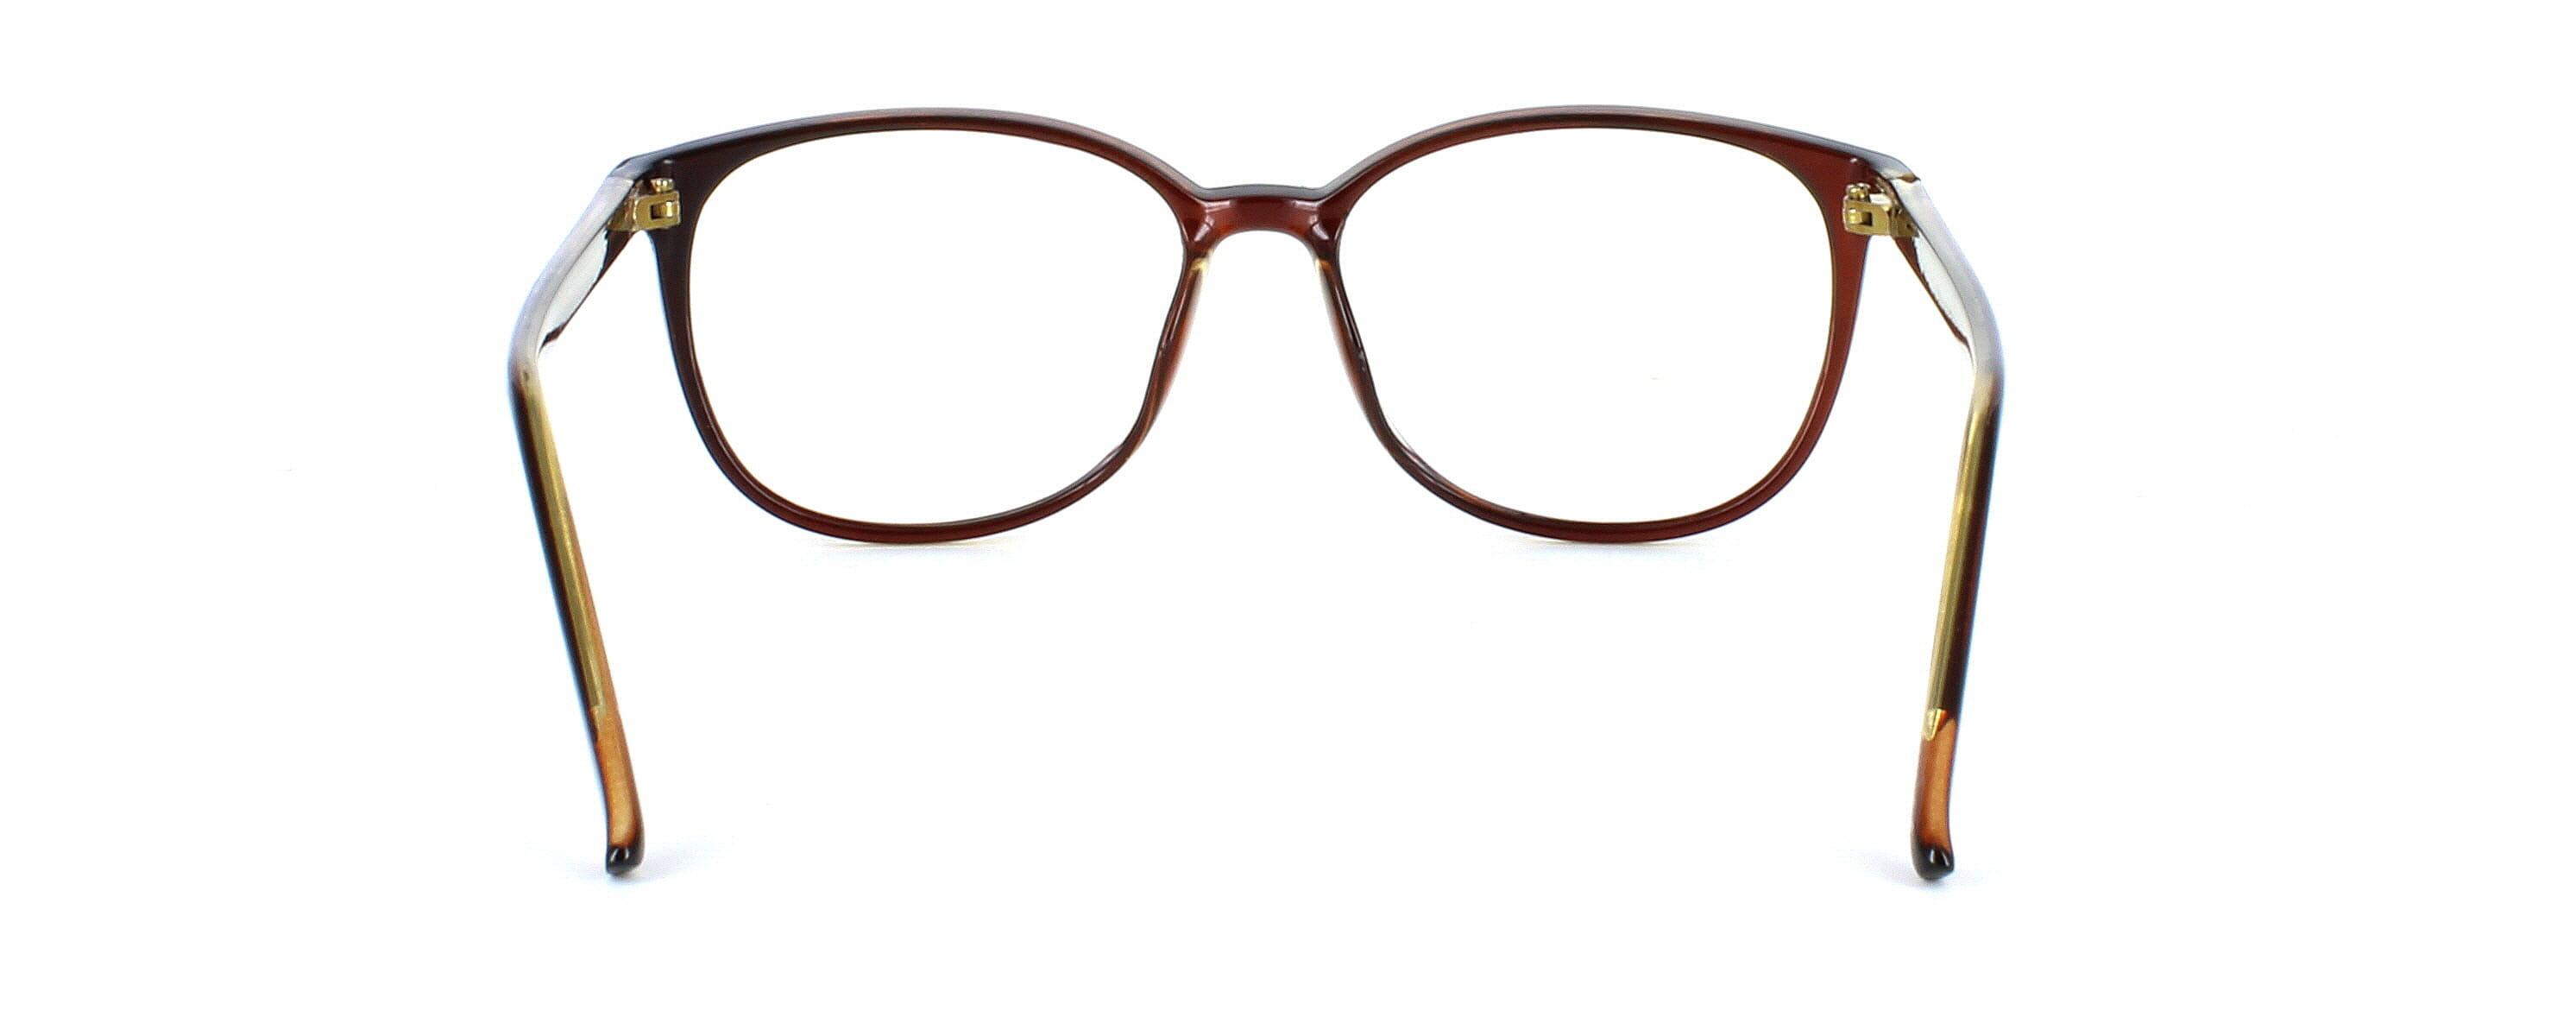 Como - Brown round shaped acetate glasses frame - image view 4